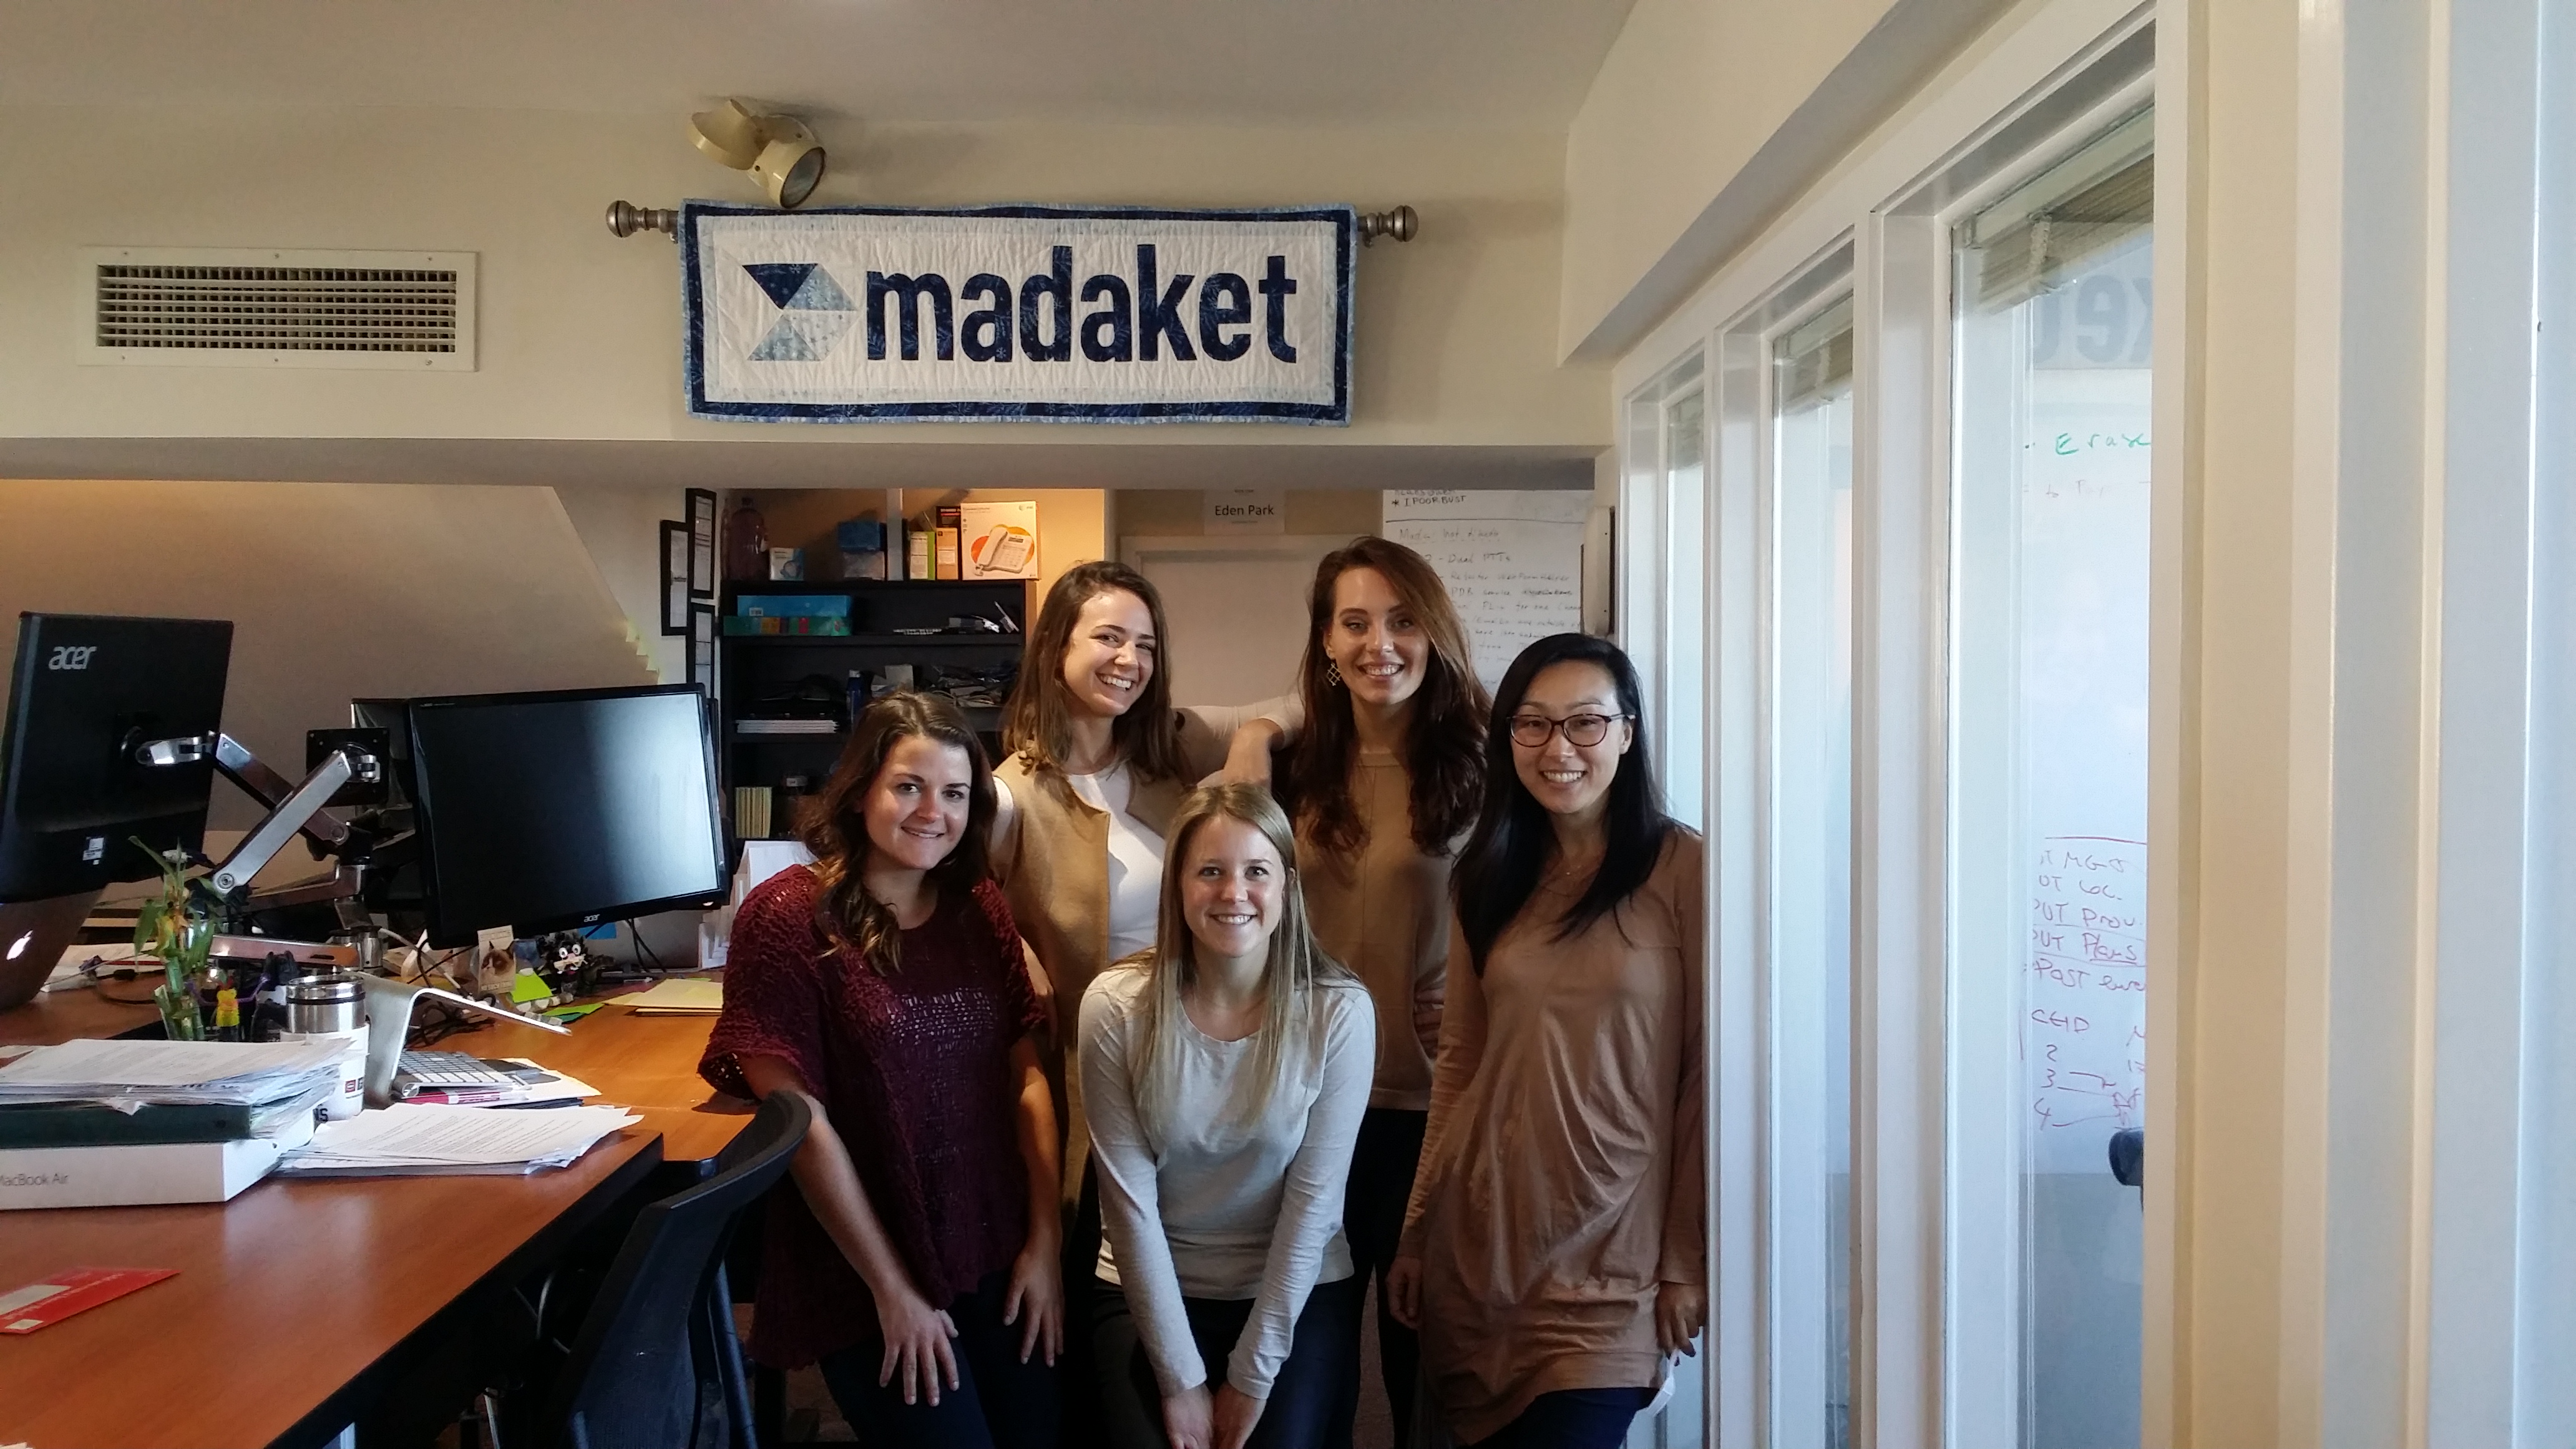 5 Madaket employees standing underneath The "Madaket quilt" hanging in the office